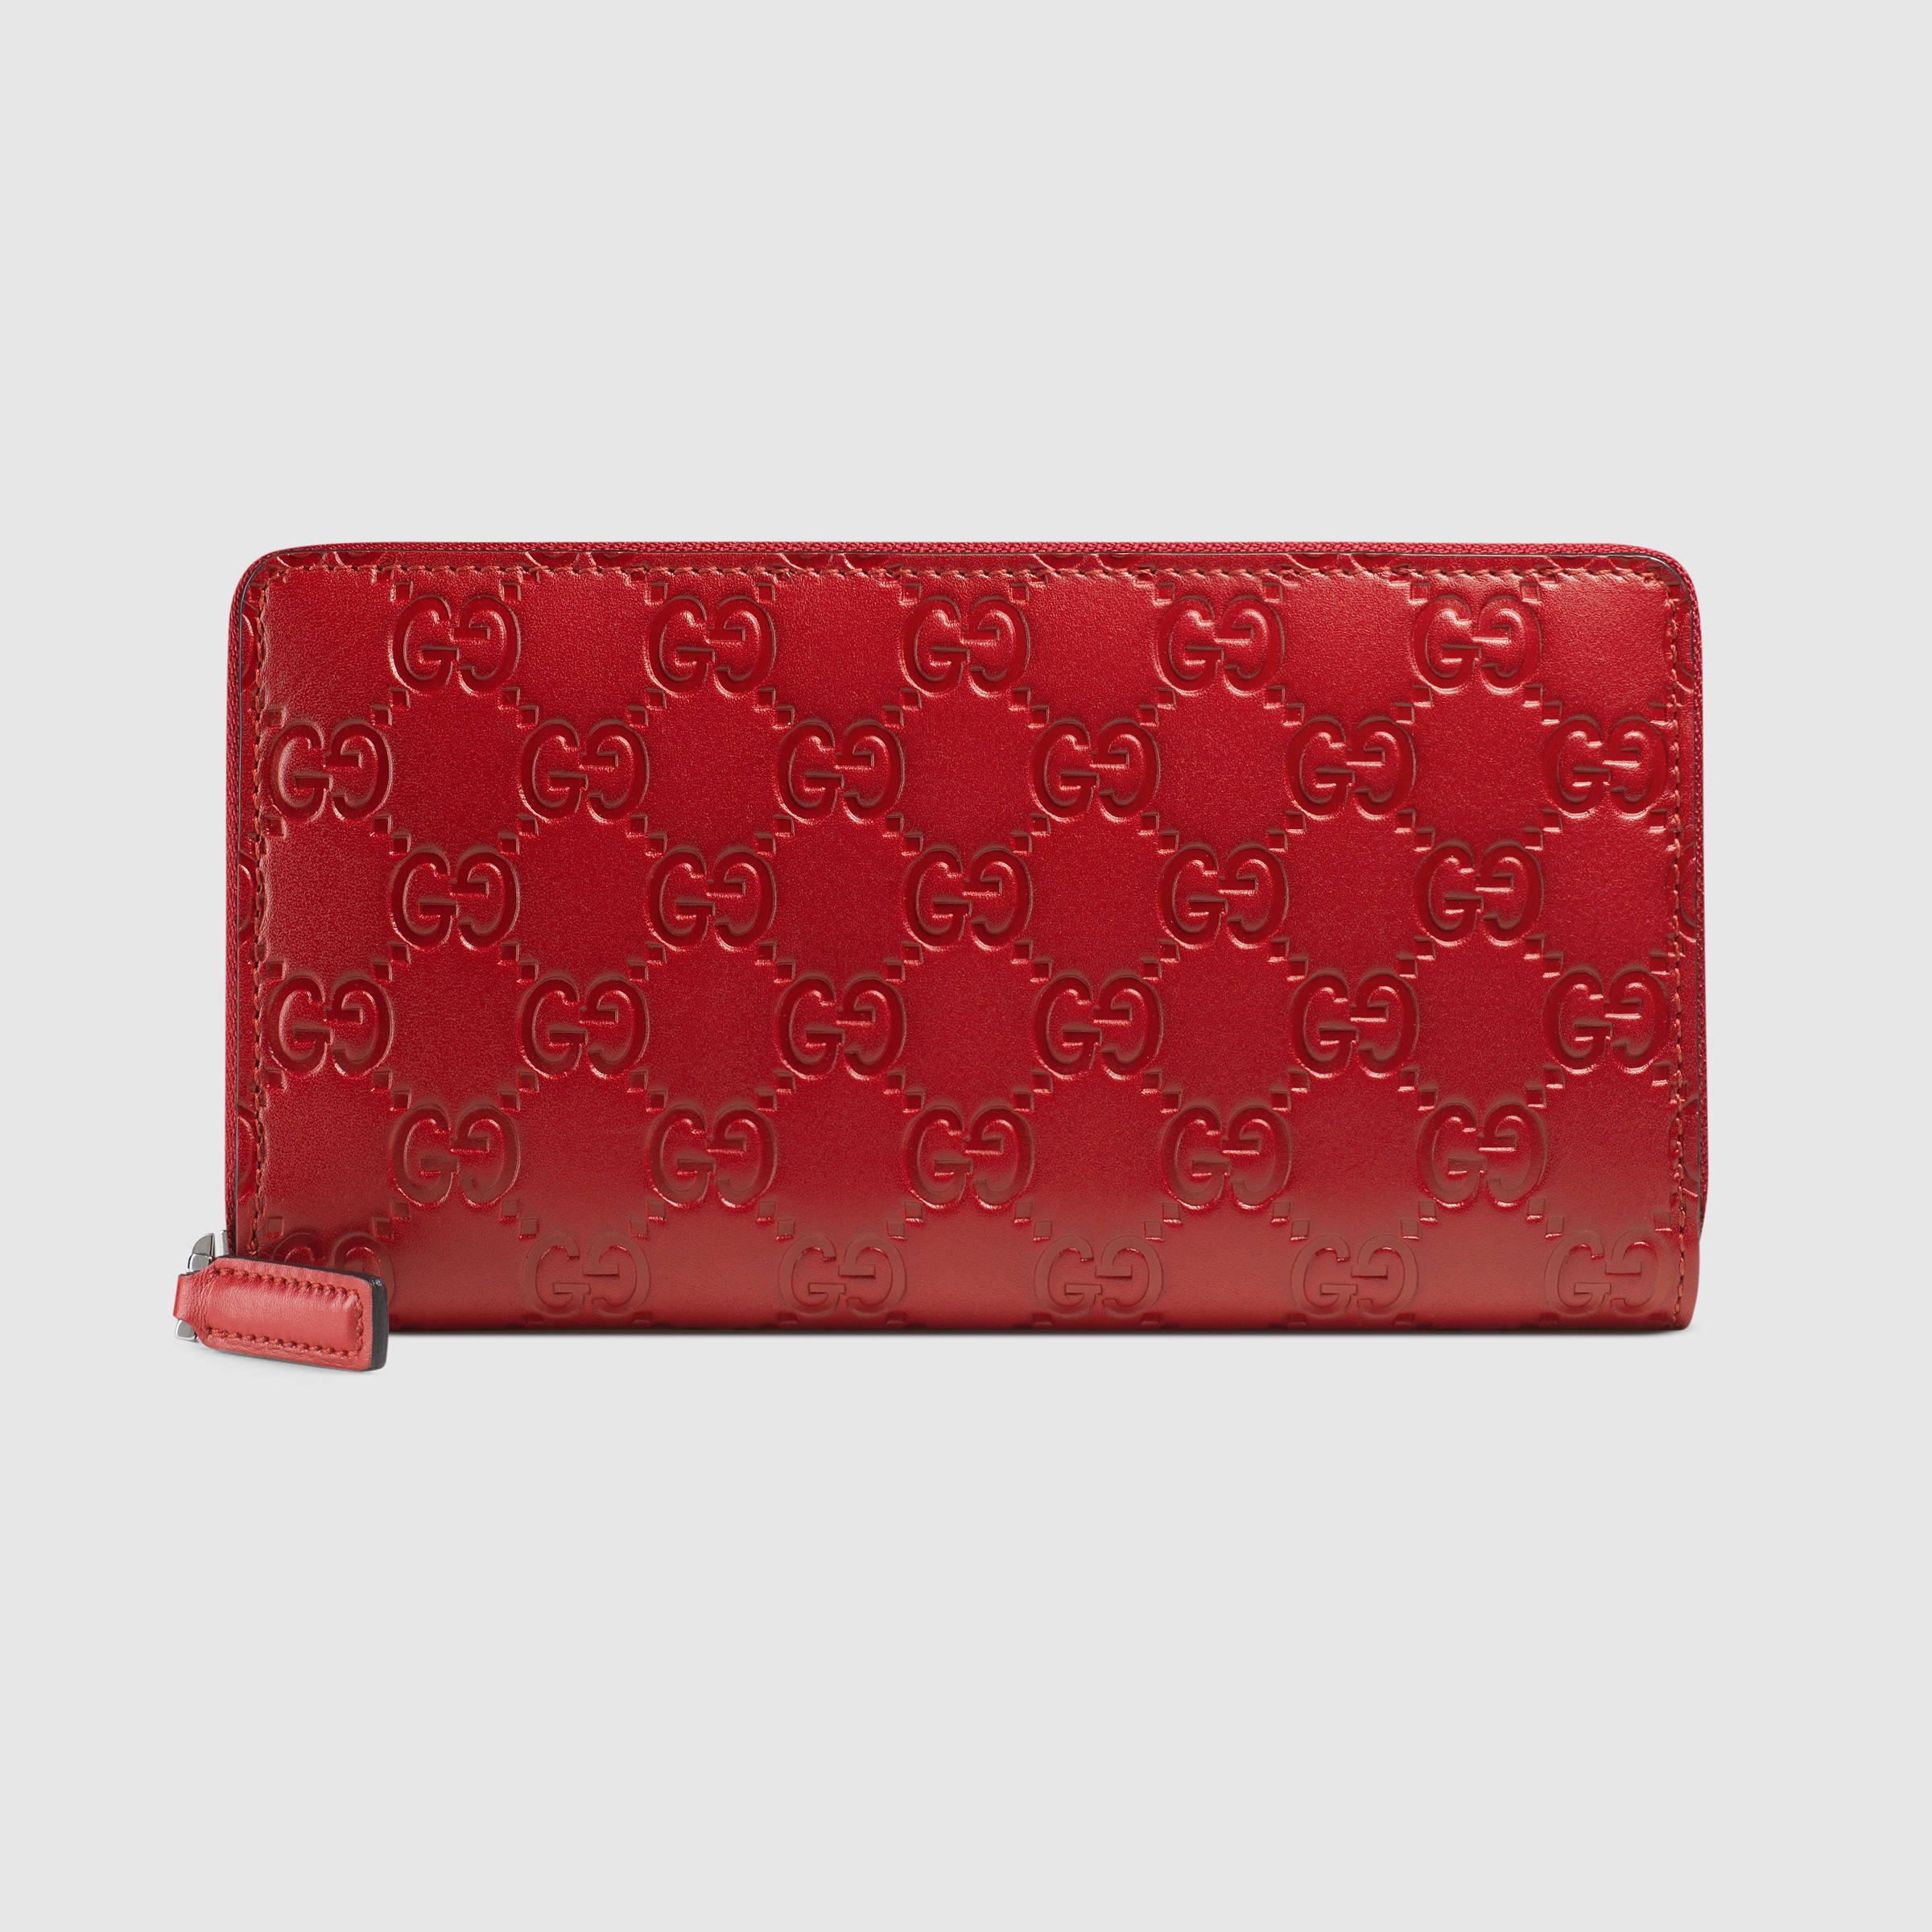 Replica Gucci Red Leather Zip Around Wallet | IUCN Water